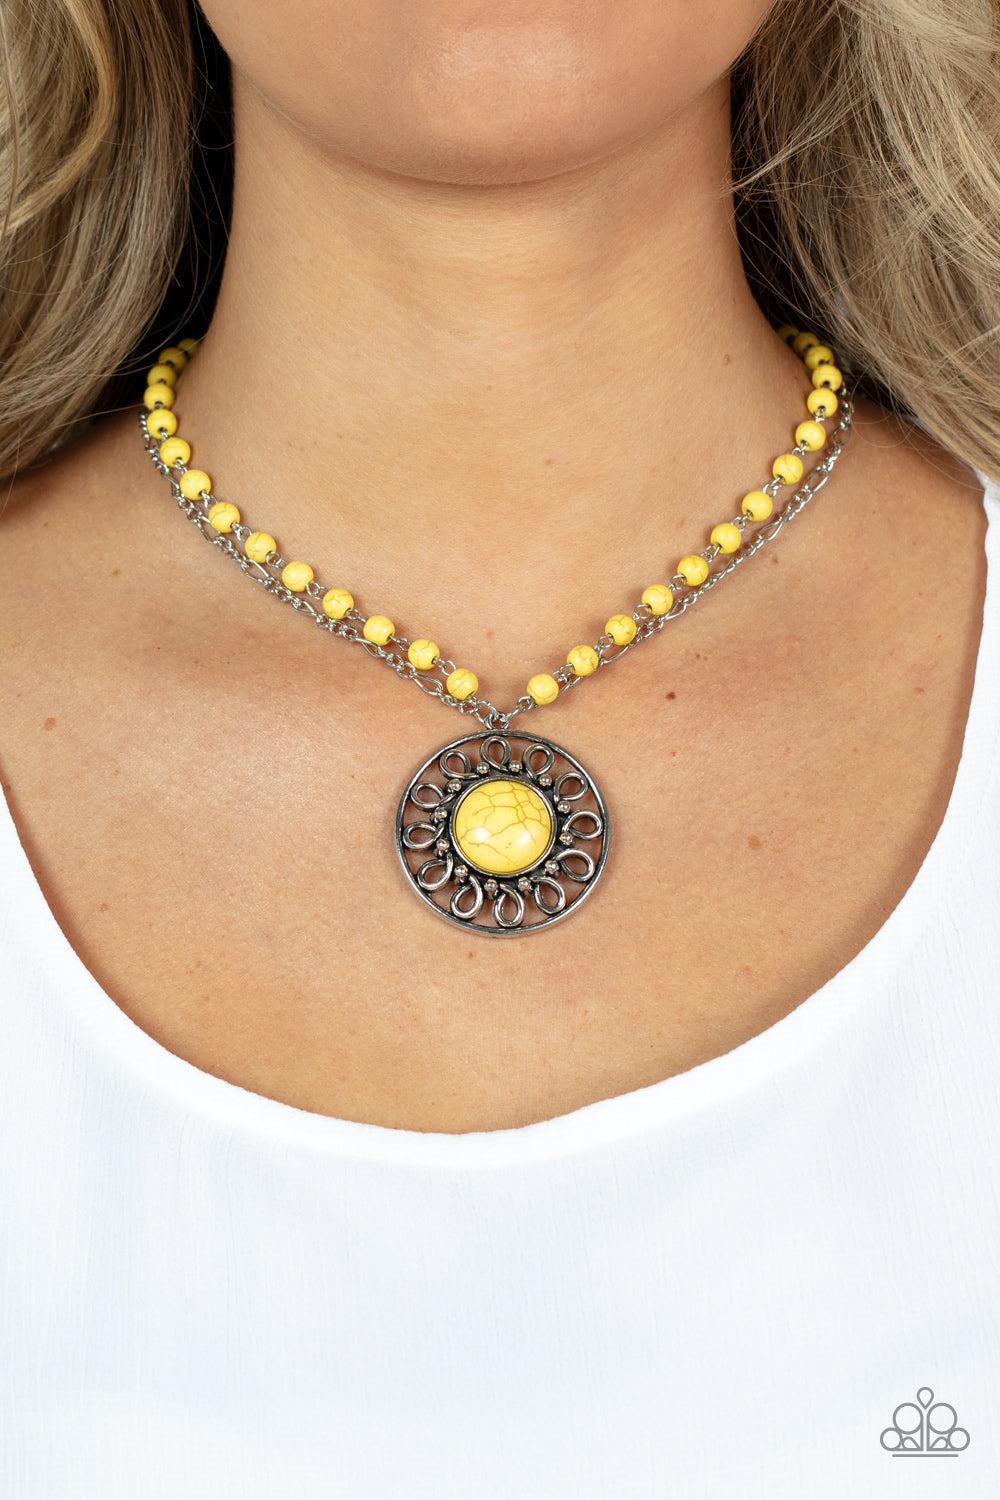 Sahara Suburb Yellow Stone Necklace - Paparazzi Accessories-on model - CarasShop.com - $5 Jewelry by Cara Jewels